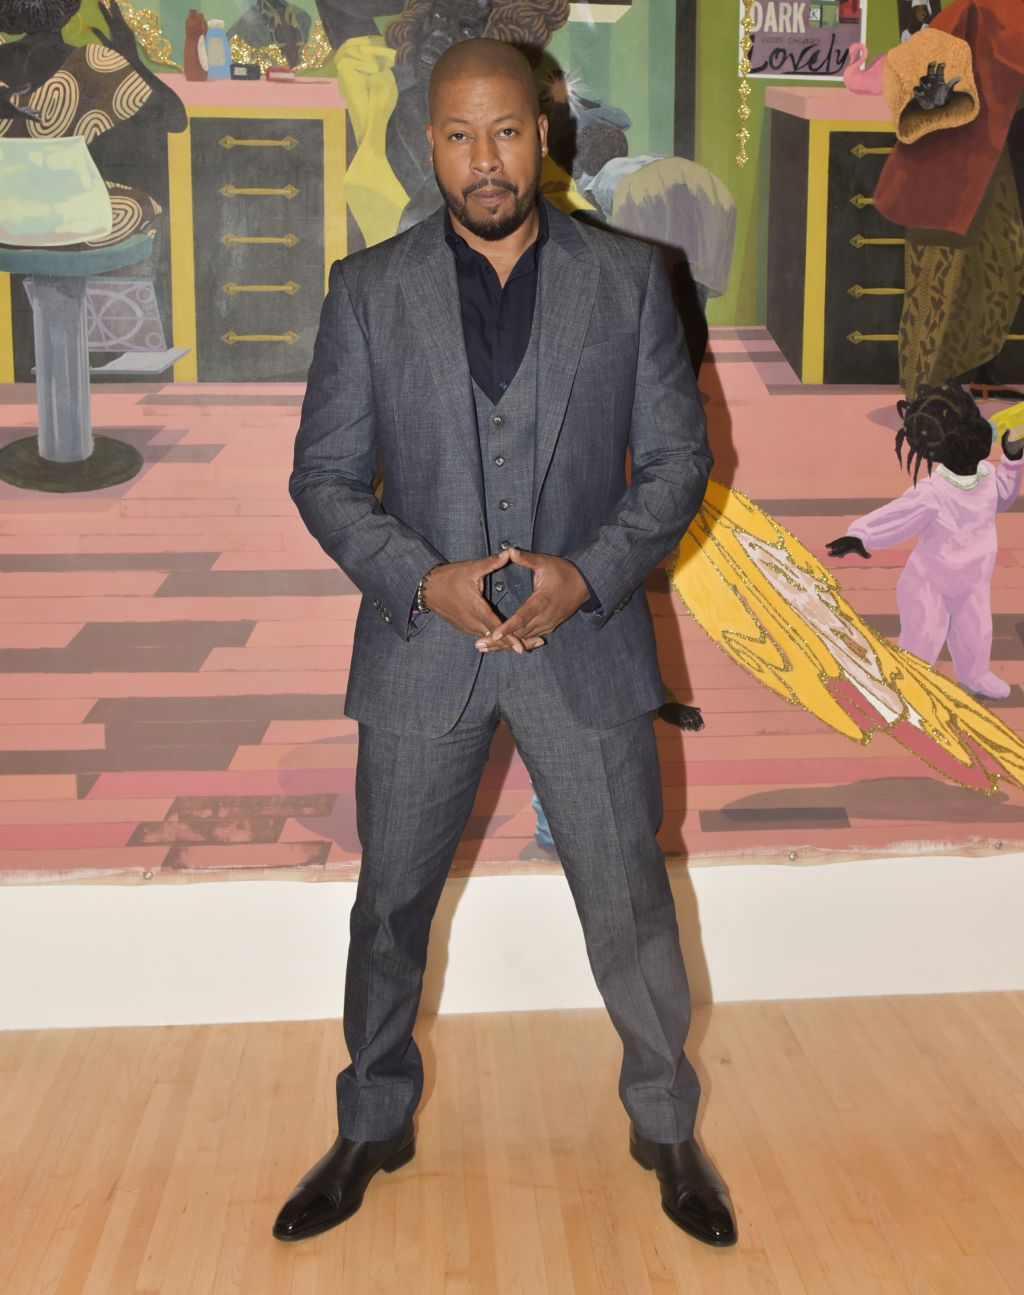 MOCA's Leadership Circle and Members' Opening of Kerry James Marshall: Mastry - Arrivals